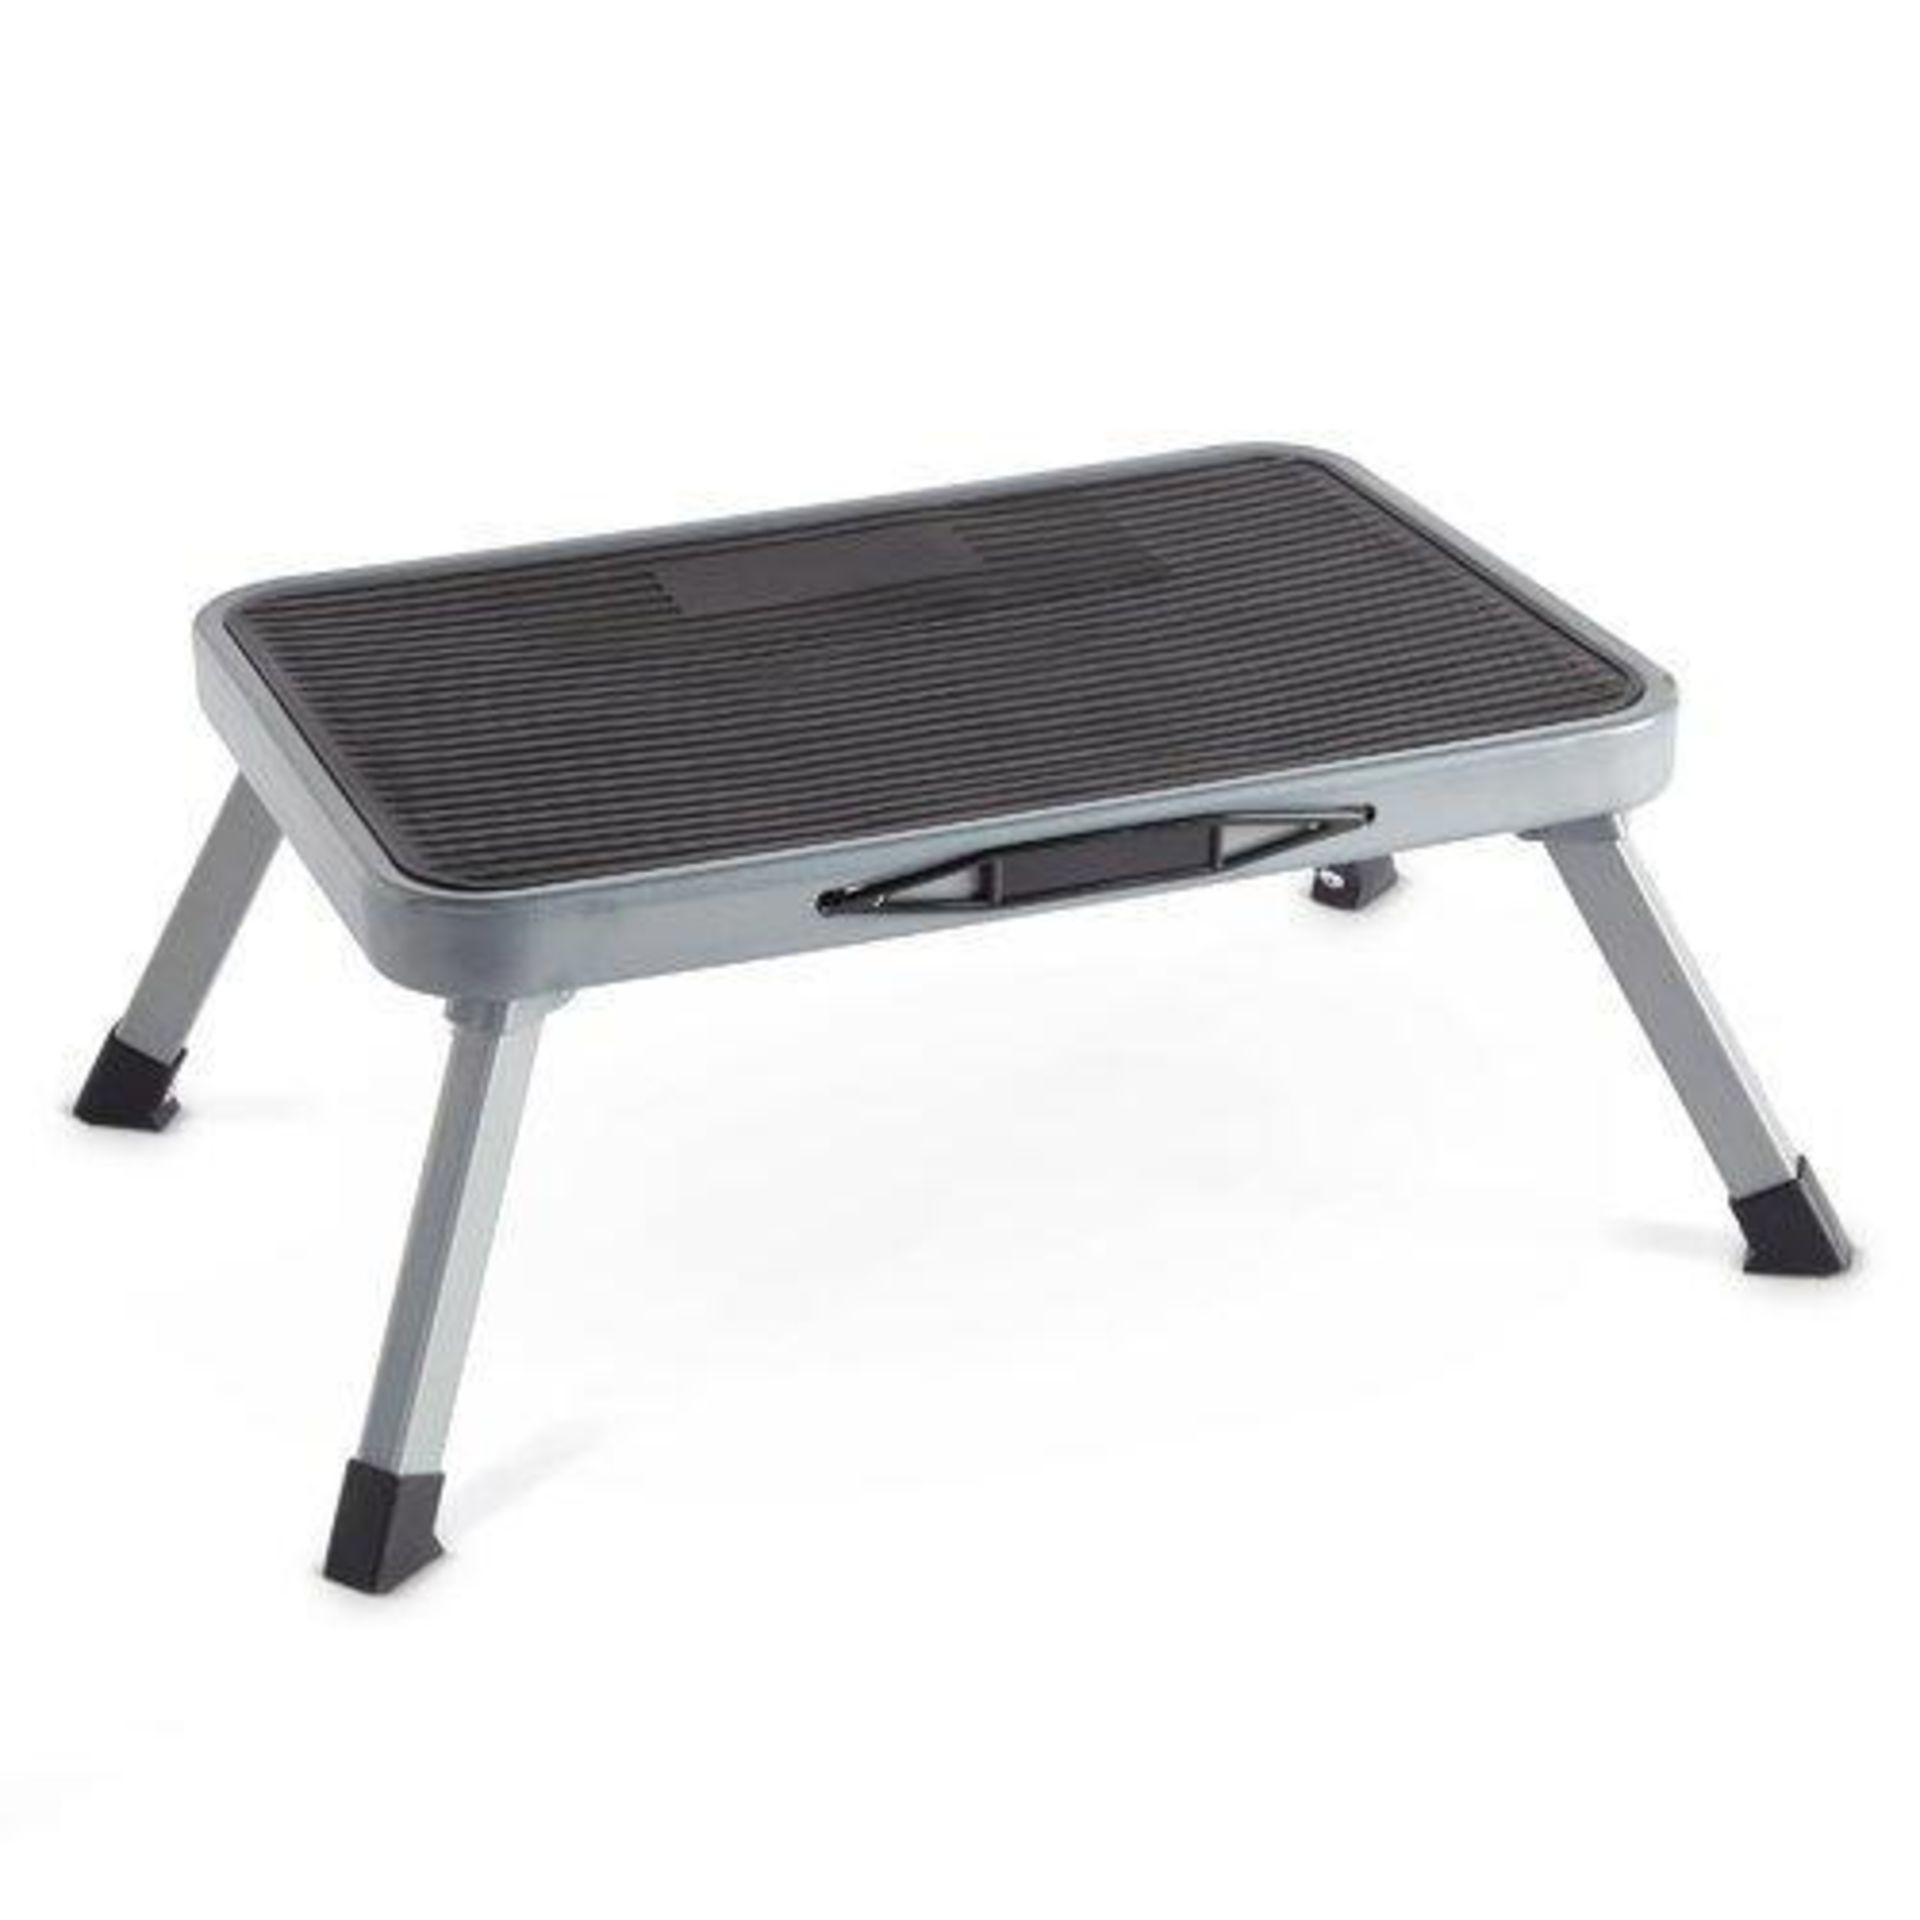 Folding Step Stool - ER50. Folding Step StoolKeep everything you need within easy reach with the